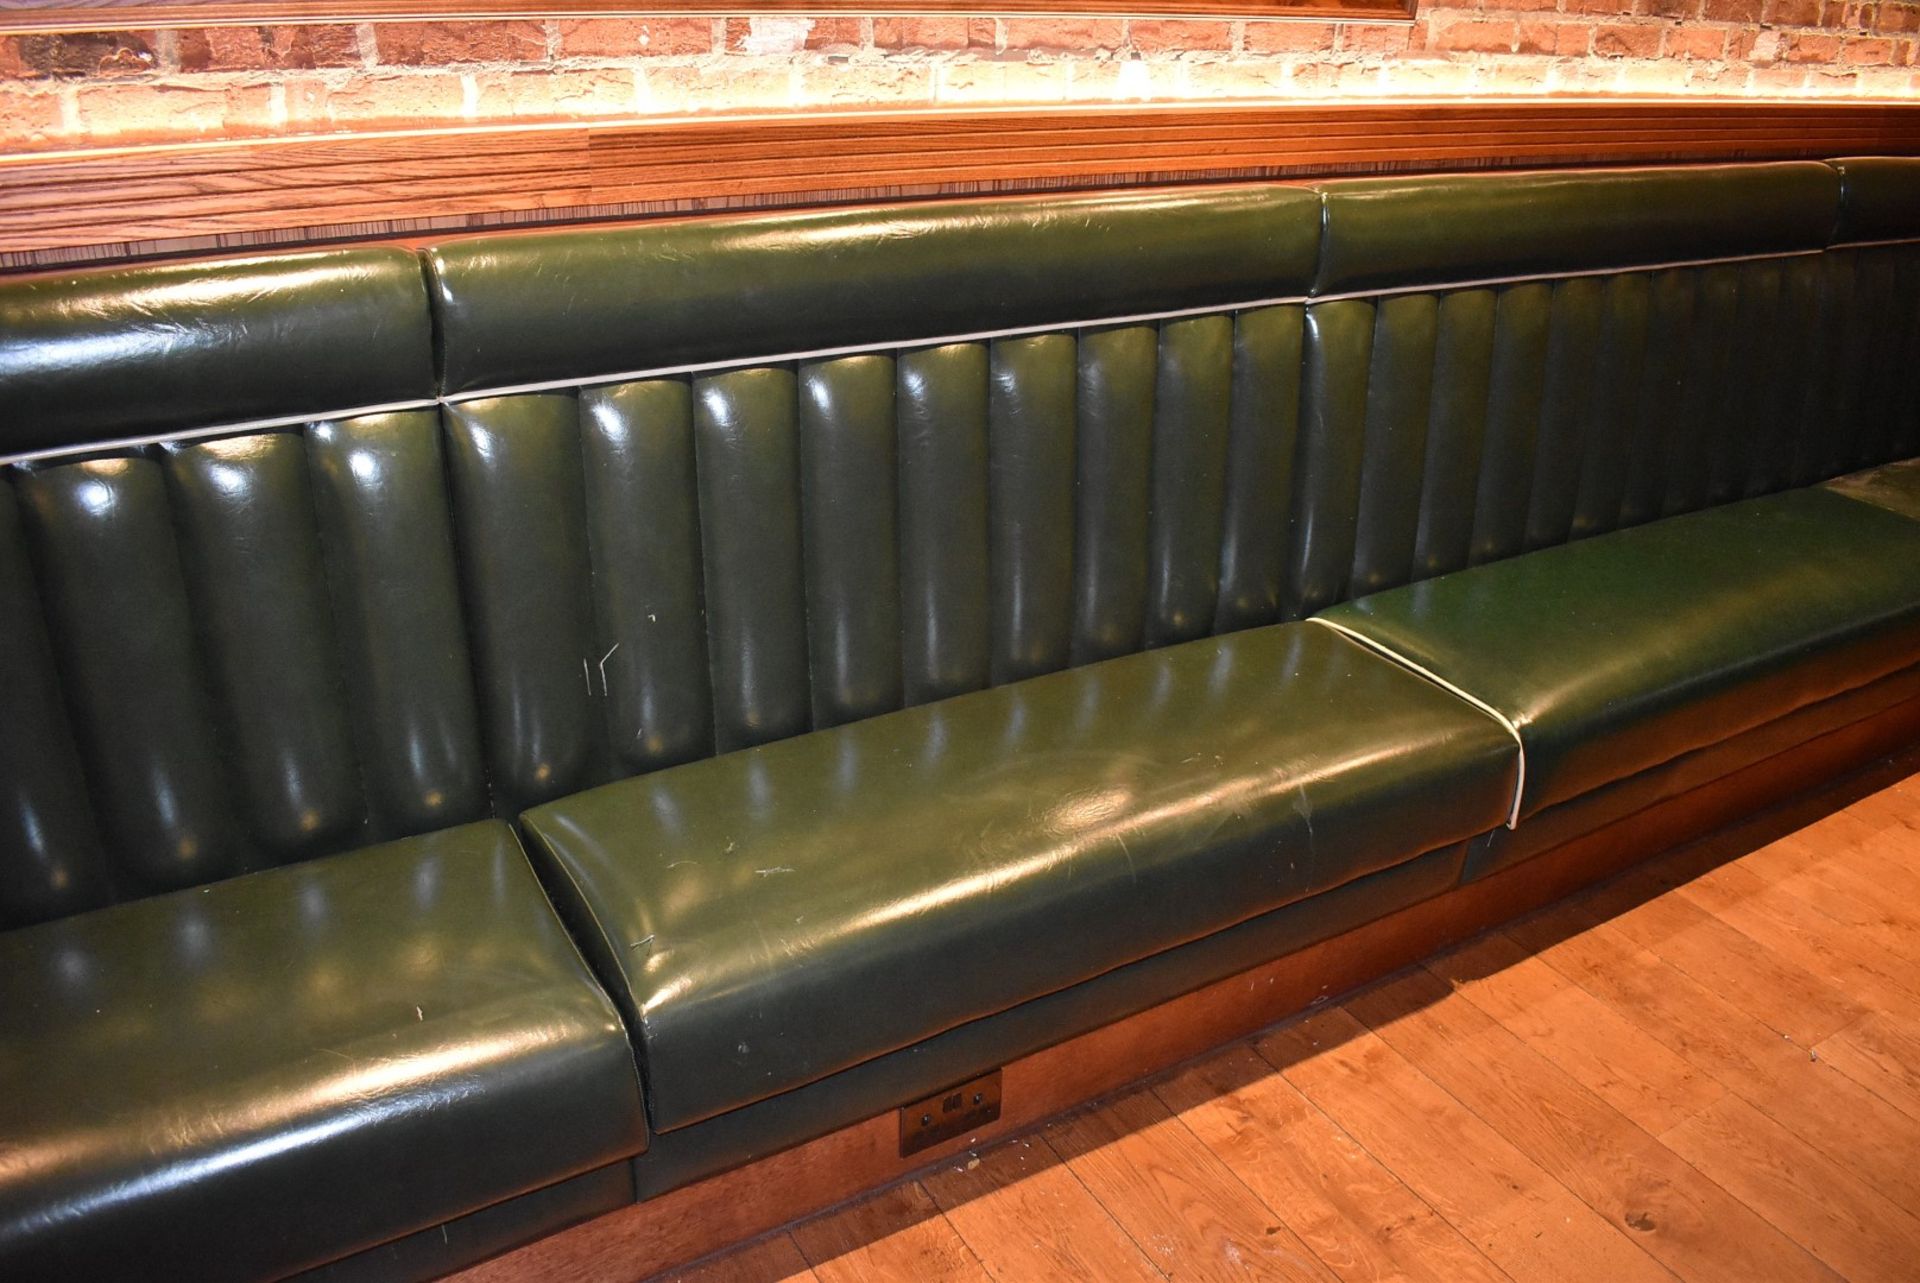 7.1-Metres Of Restaurant Booth Seating (5 x Sections) - Upholstered In Dark Green Faux Leather - Image 5 of 5